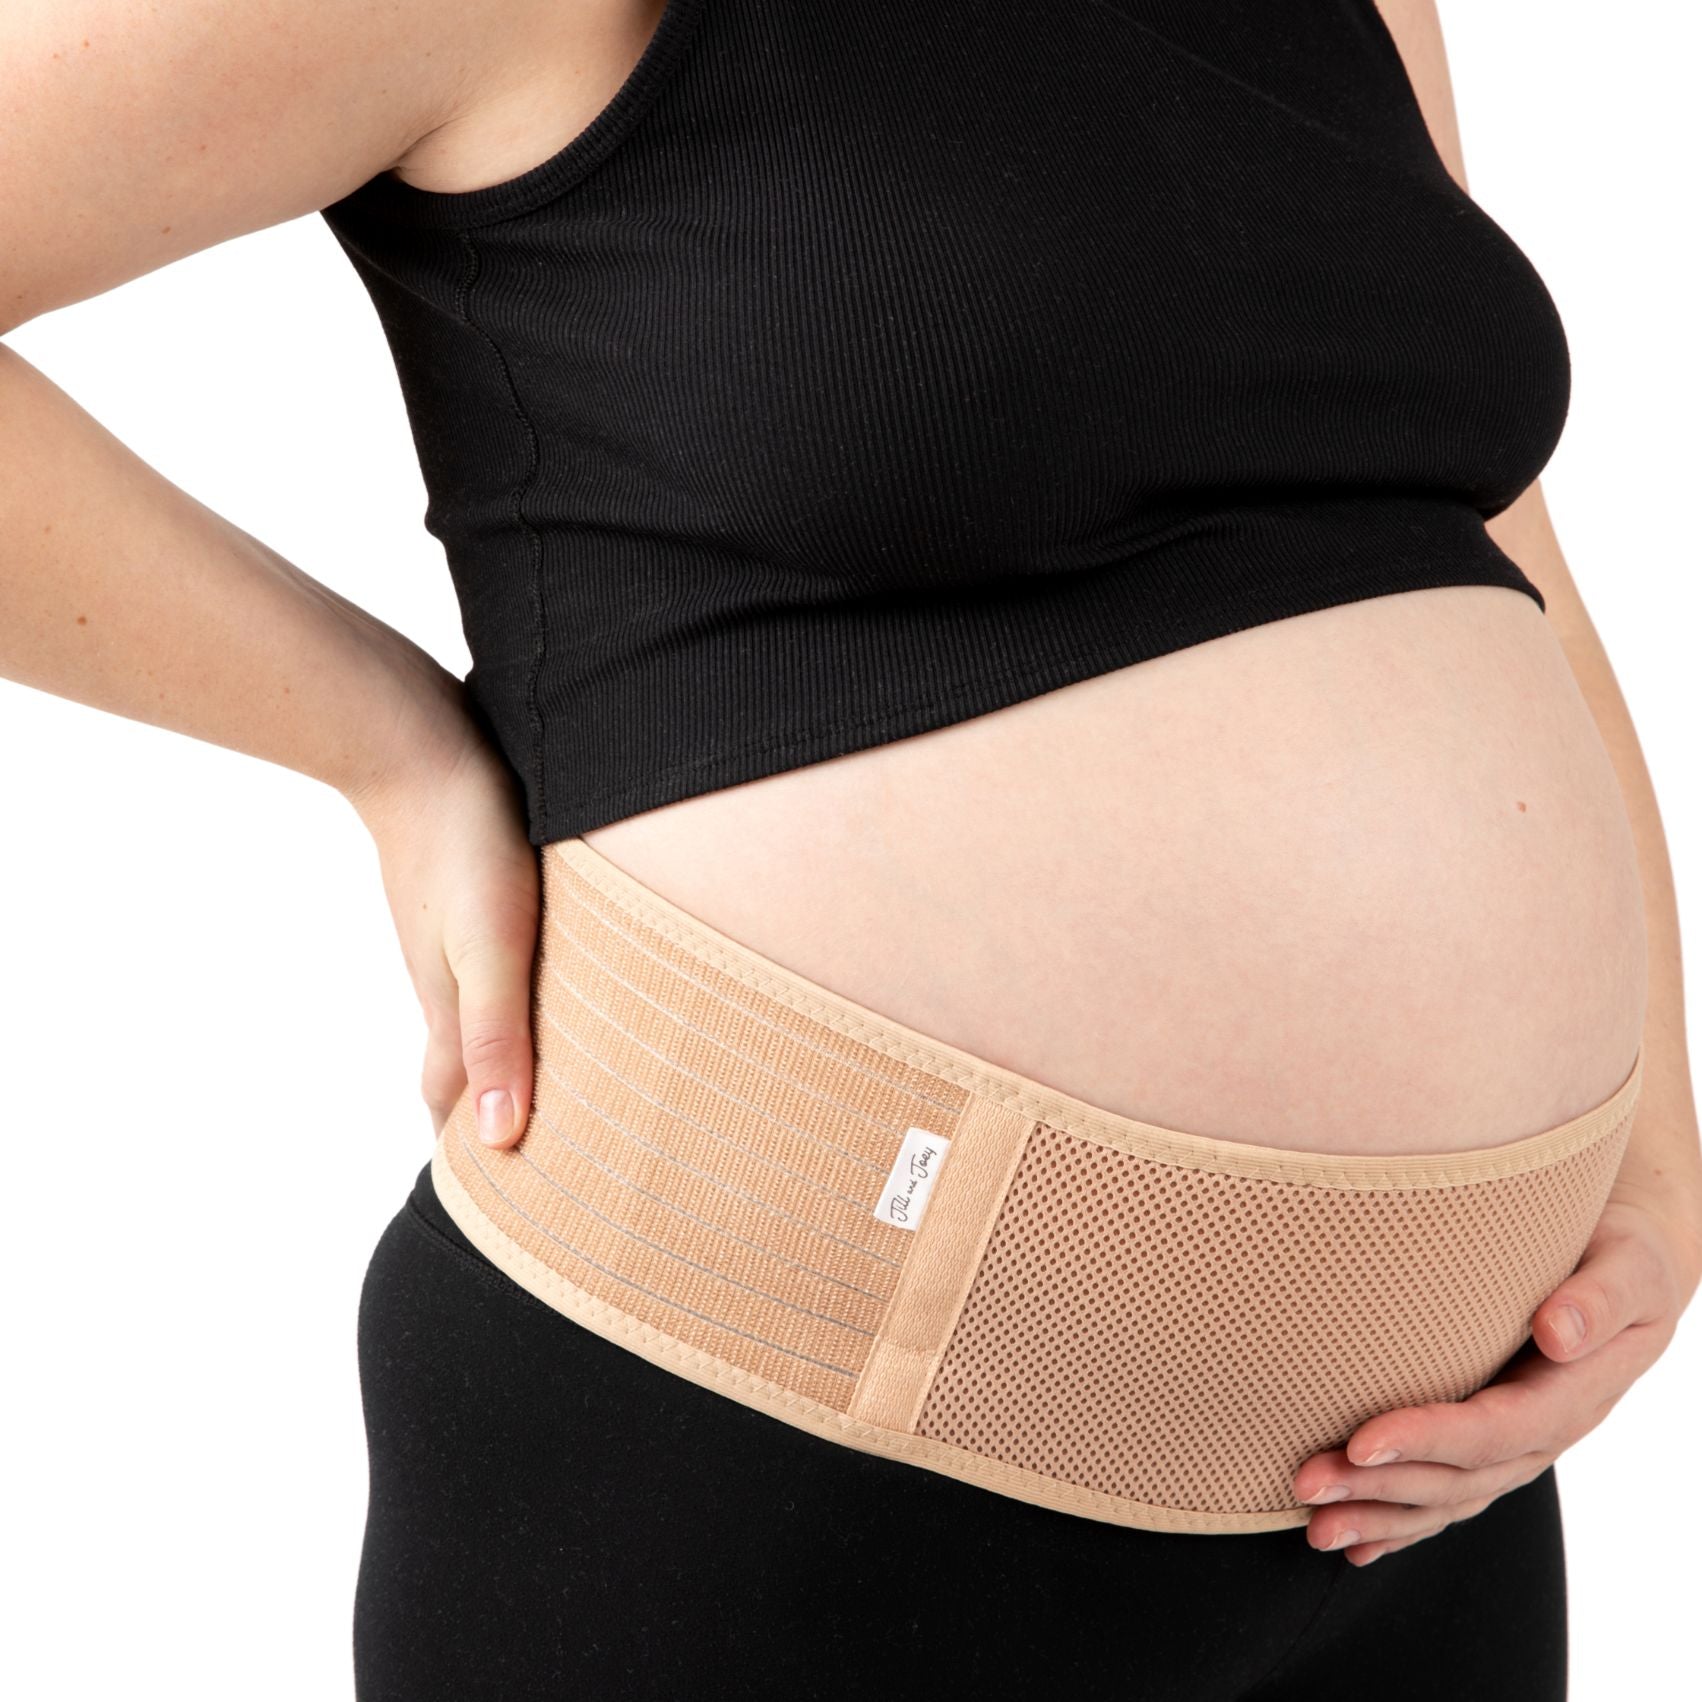 BRAND NEW Japan Inujirushi High Quality Maternity Belly Band